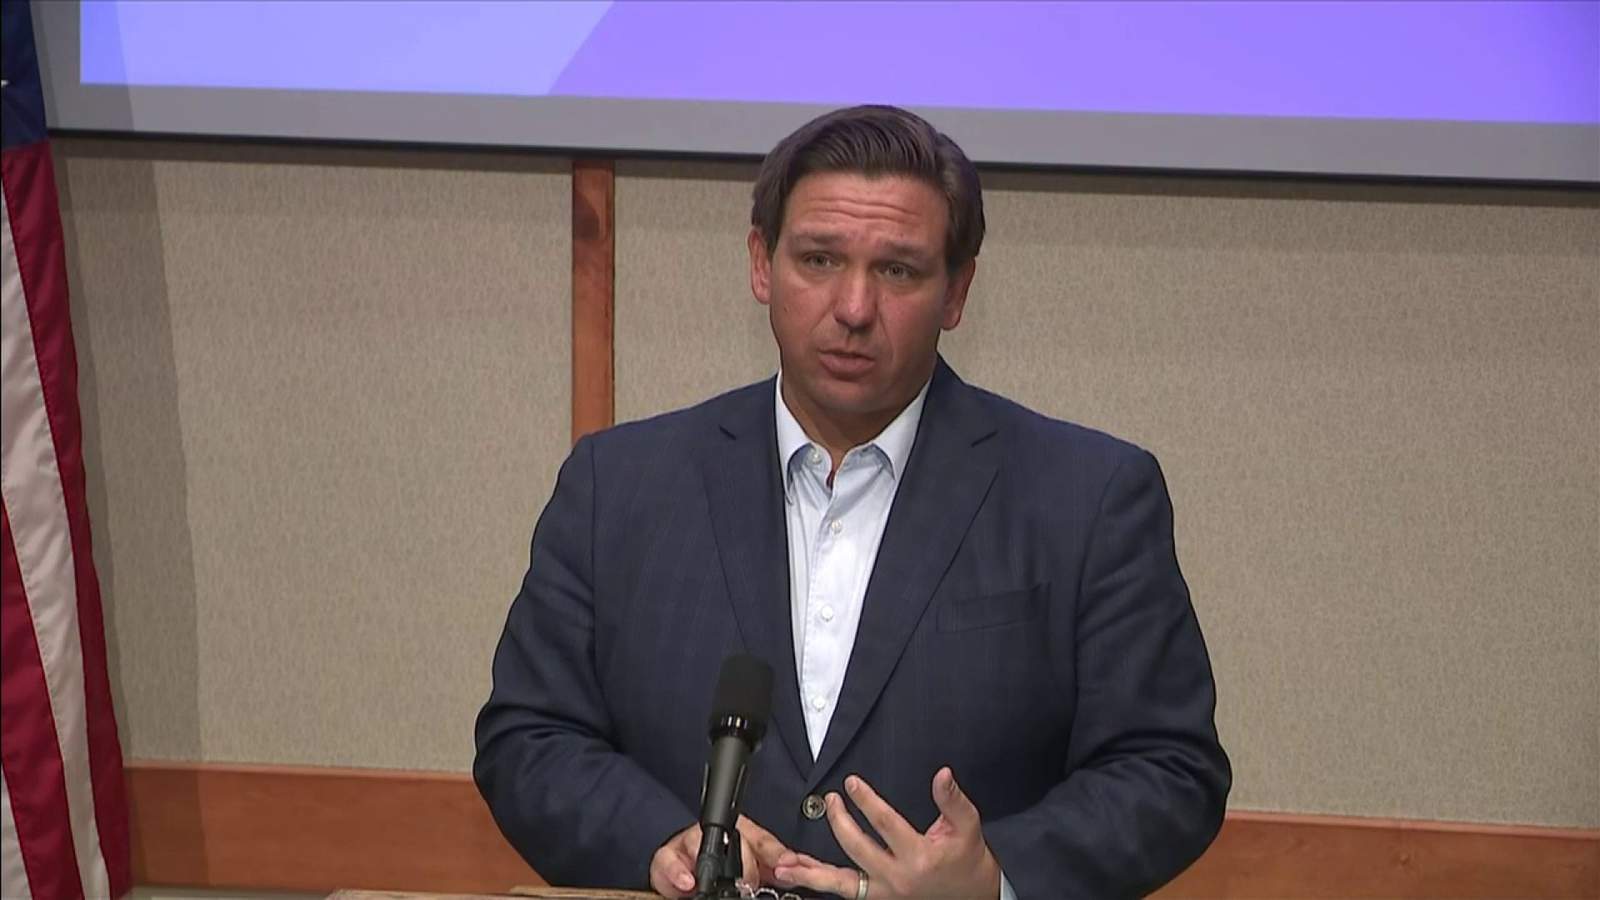 Governor DeSantis prioritizes early vaccines for anyone aged 65 and over